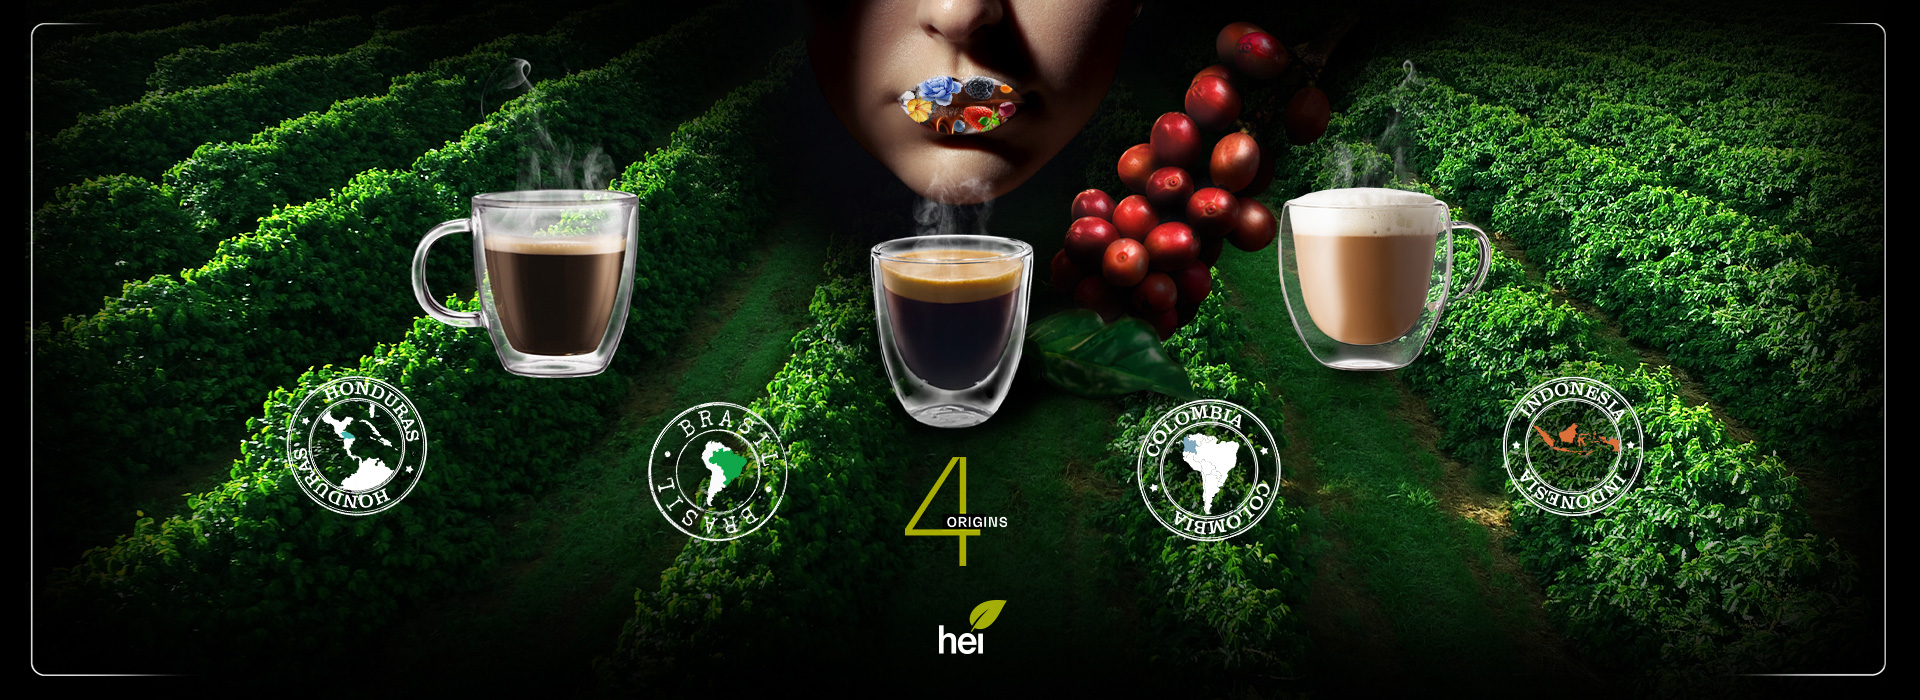 Rompetrol Coffee Campaign